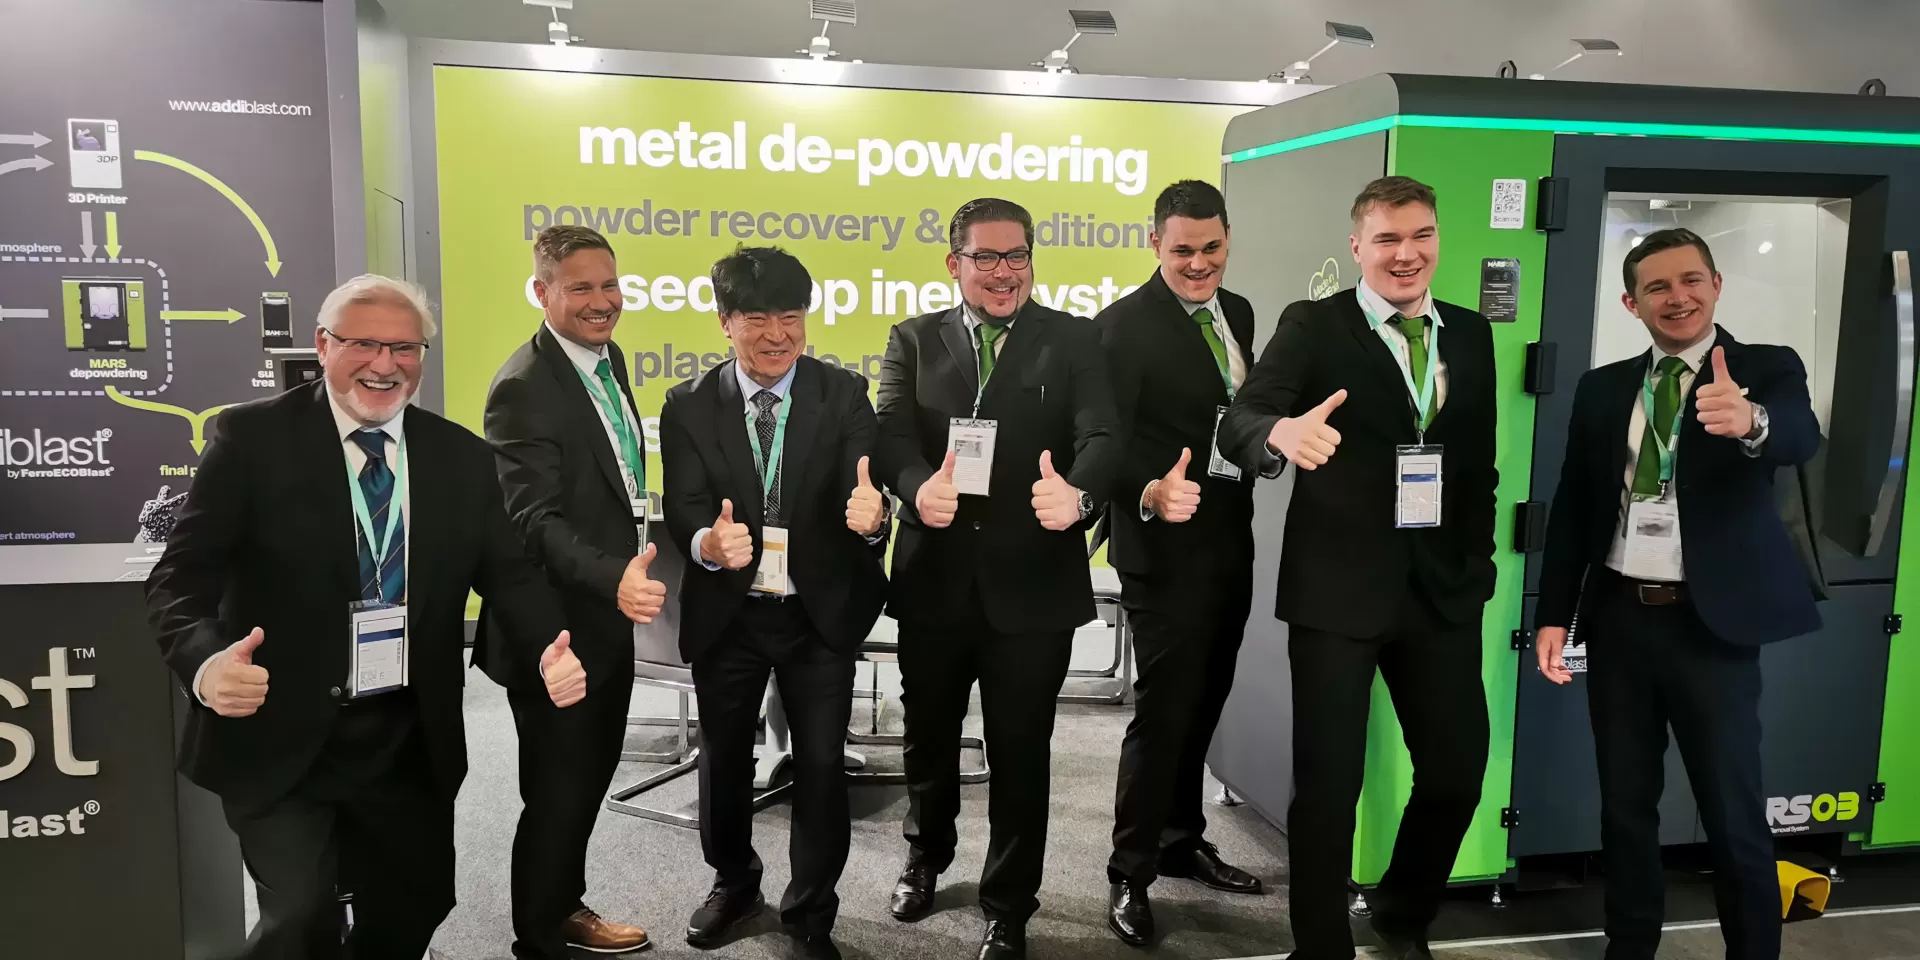 Thank you for stopping by Formnext 2022!
